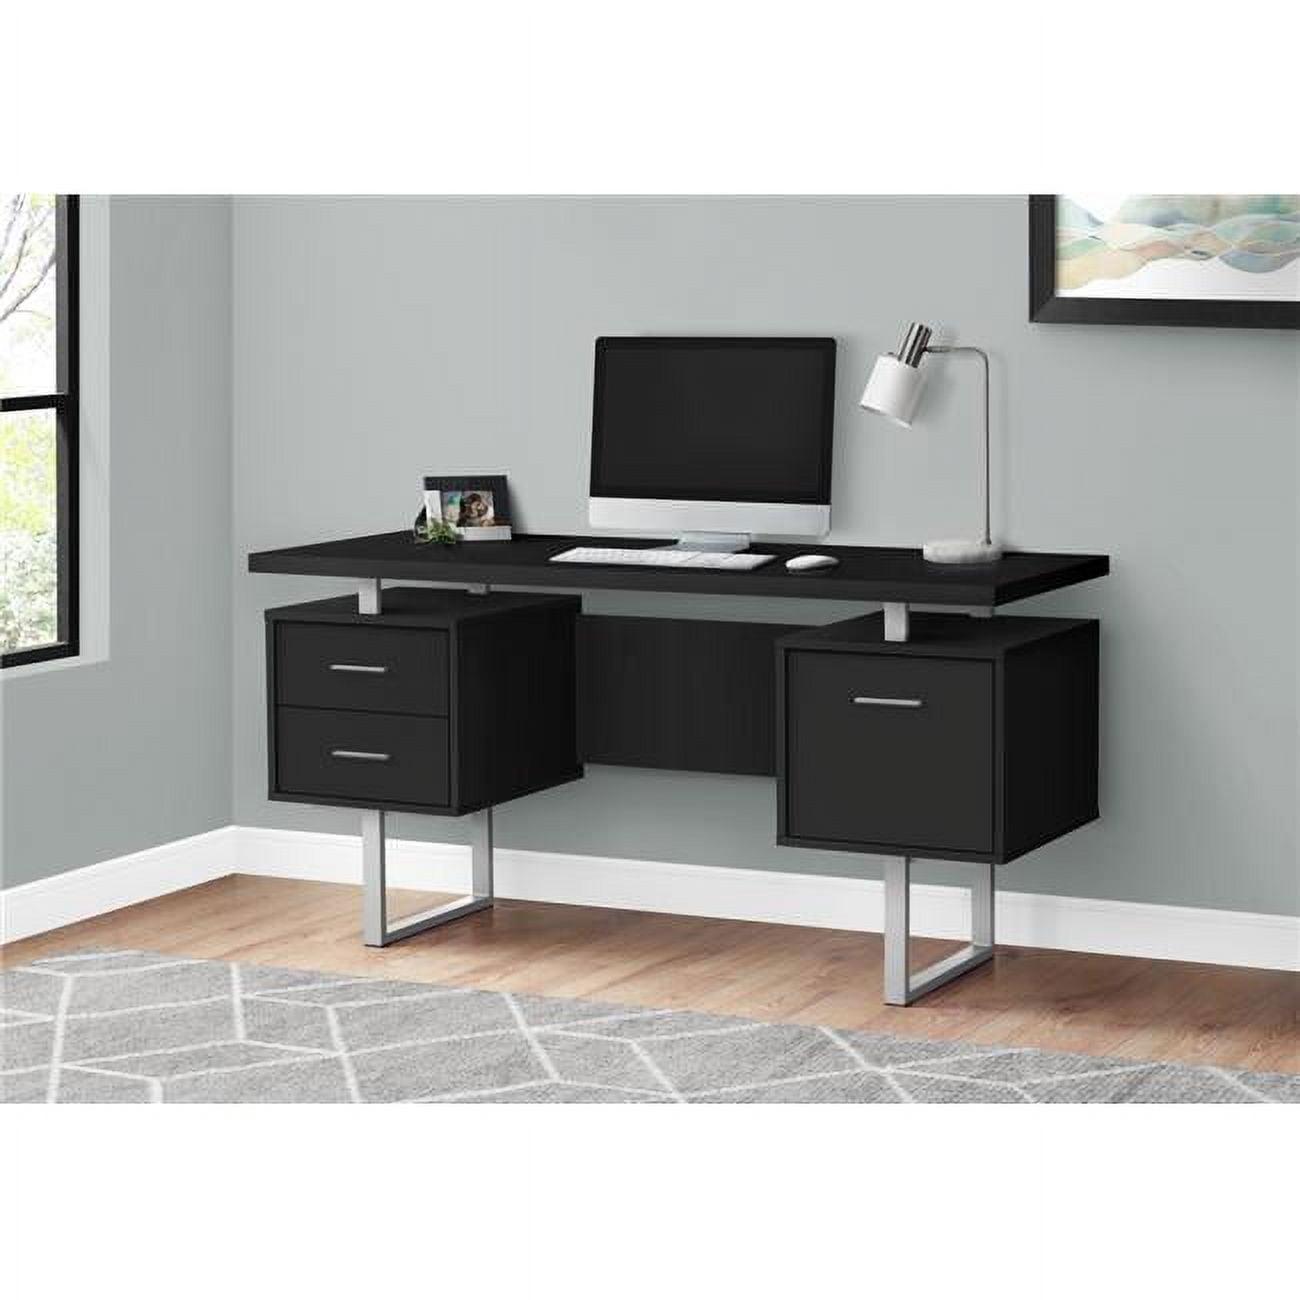 Contemporary Black and Silver Home Office Desk with Filing Cabinet